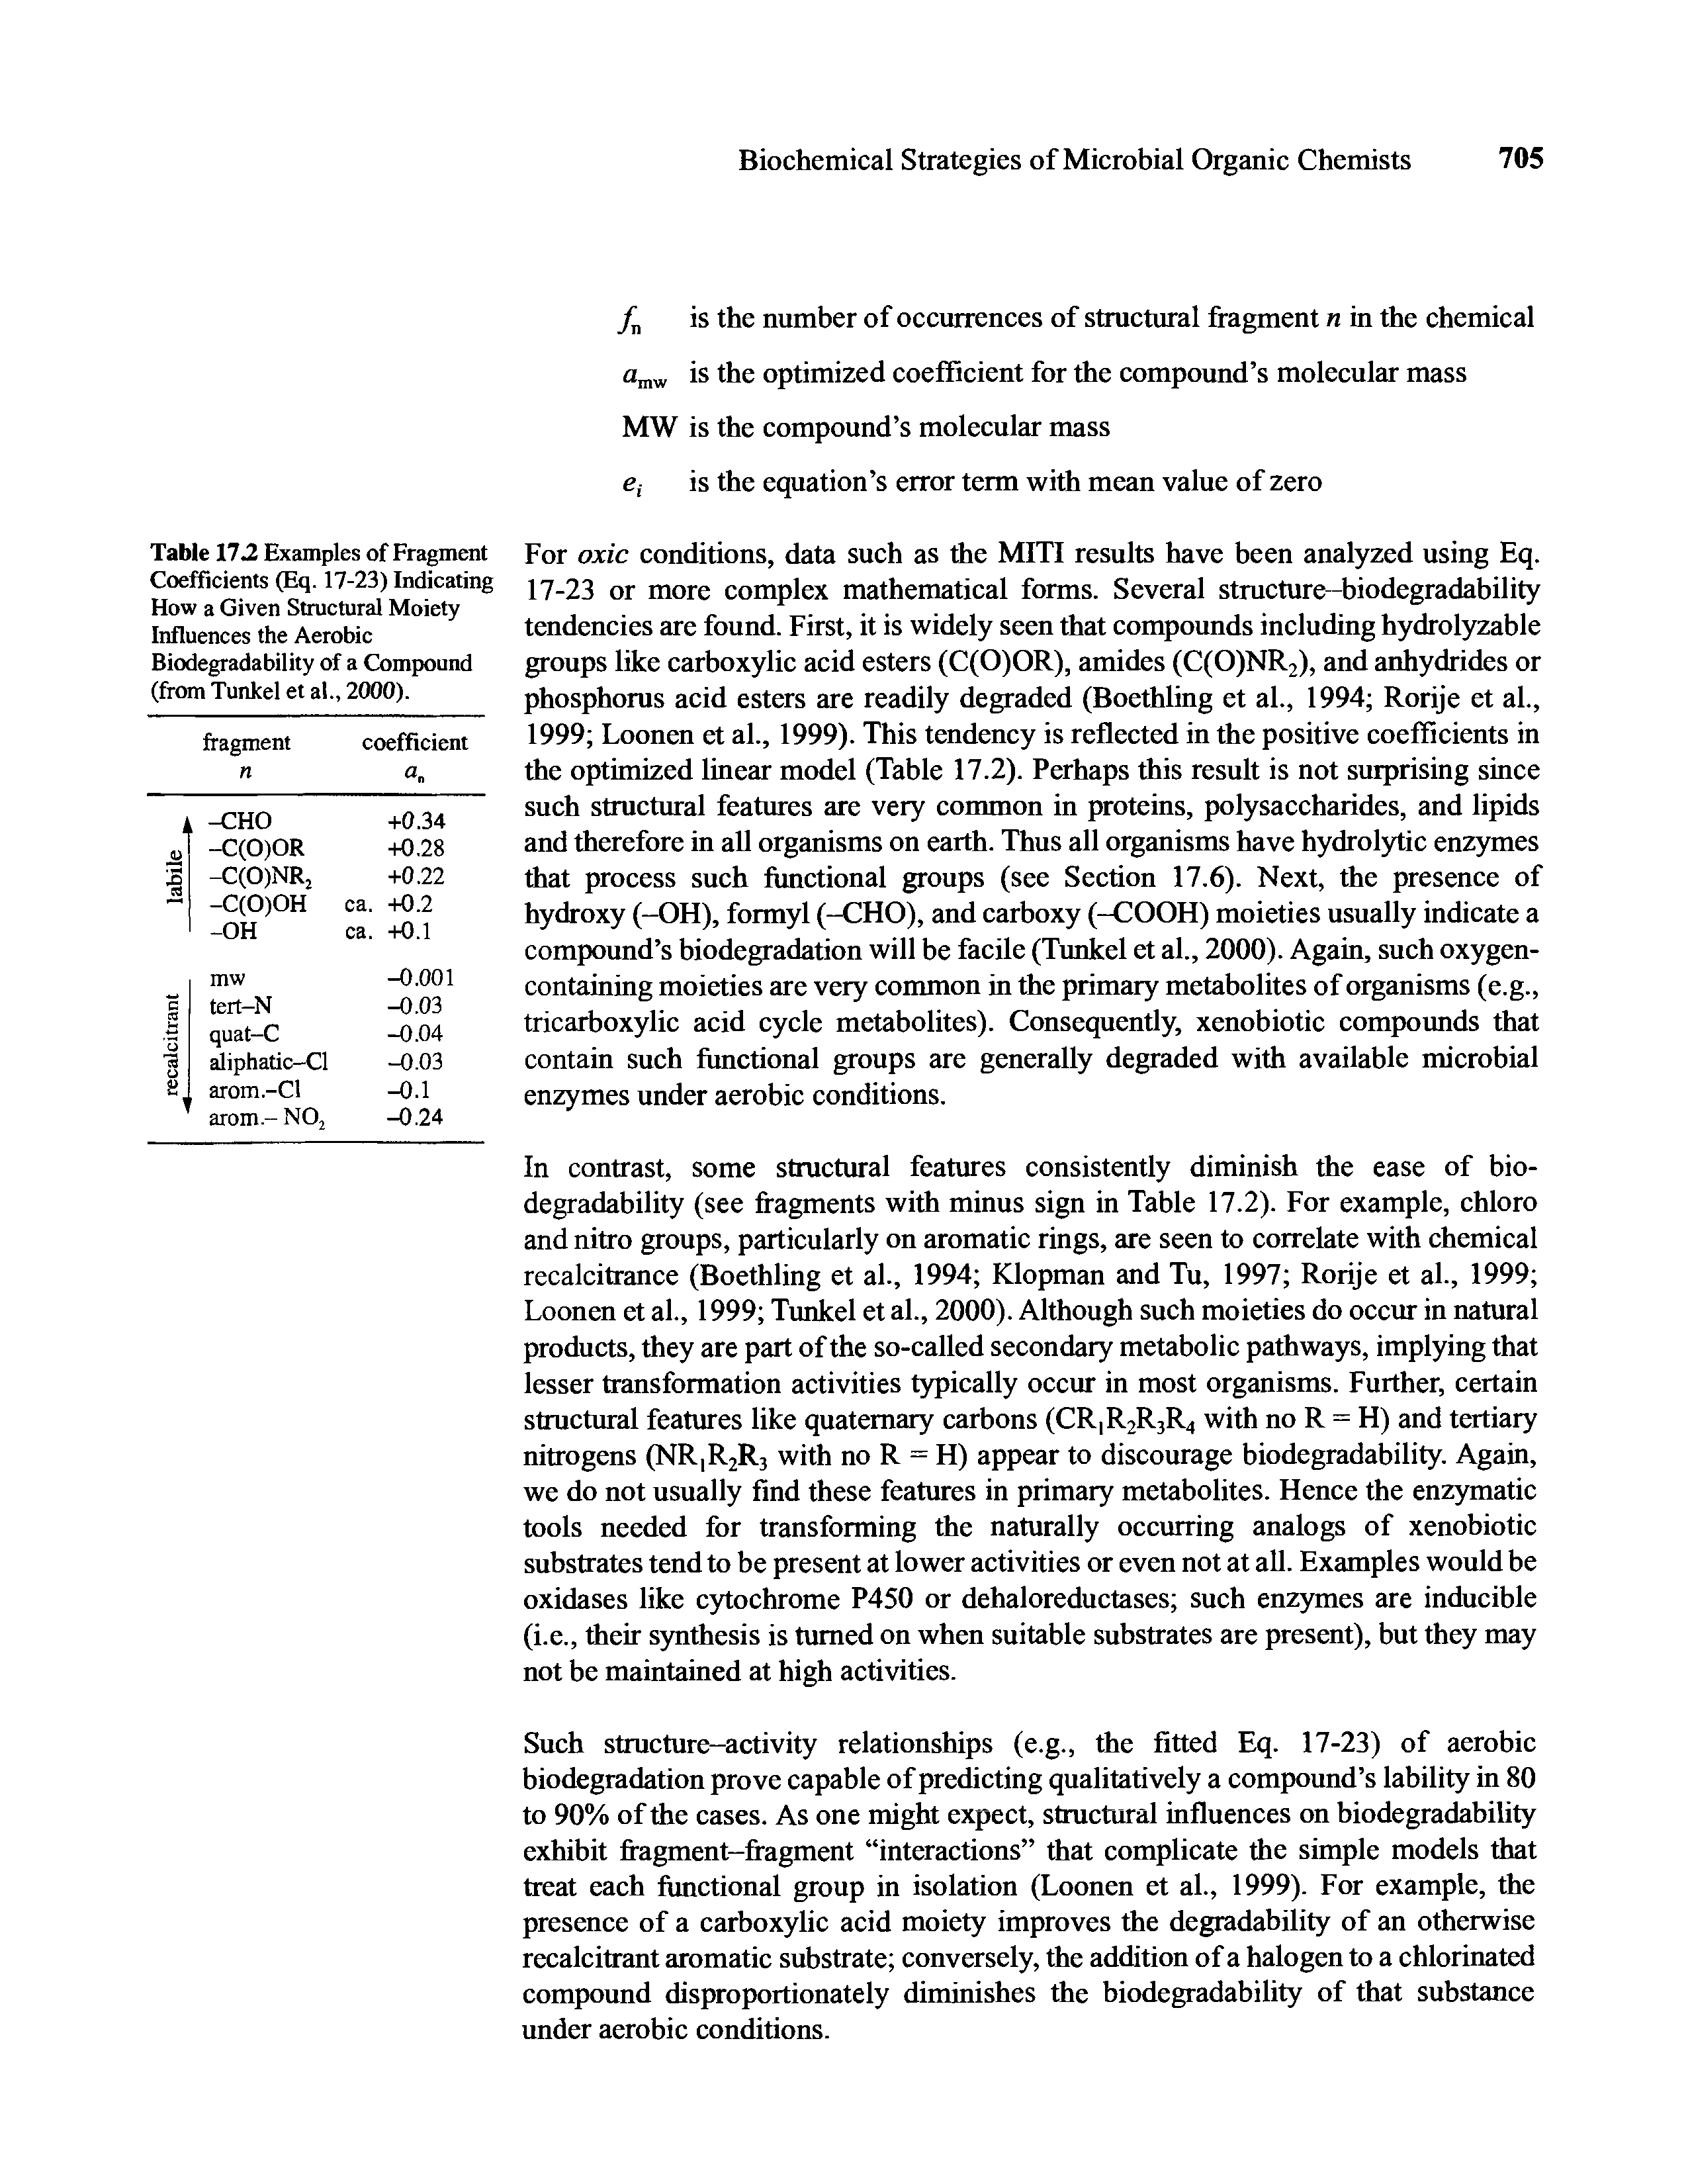 Table 17-2 Examples of Fragment Coefficients (Eq. 17-23) Indicating How a Given Structural Moiety Influences the Aerobic Biodegradability of a Compound (from Tunkel et al., 2000).